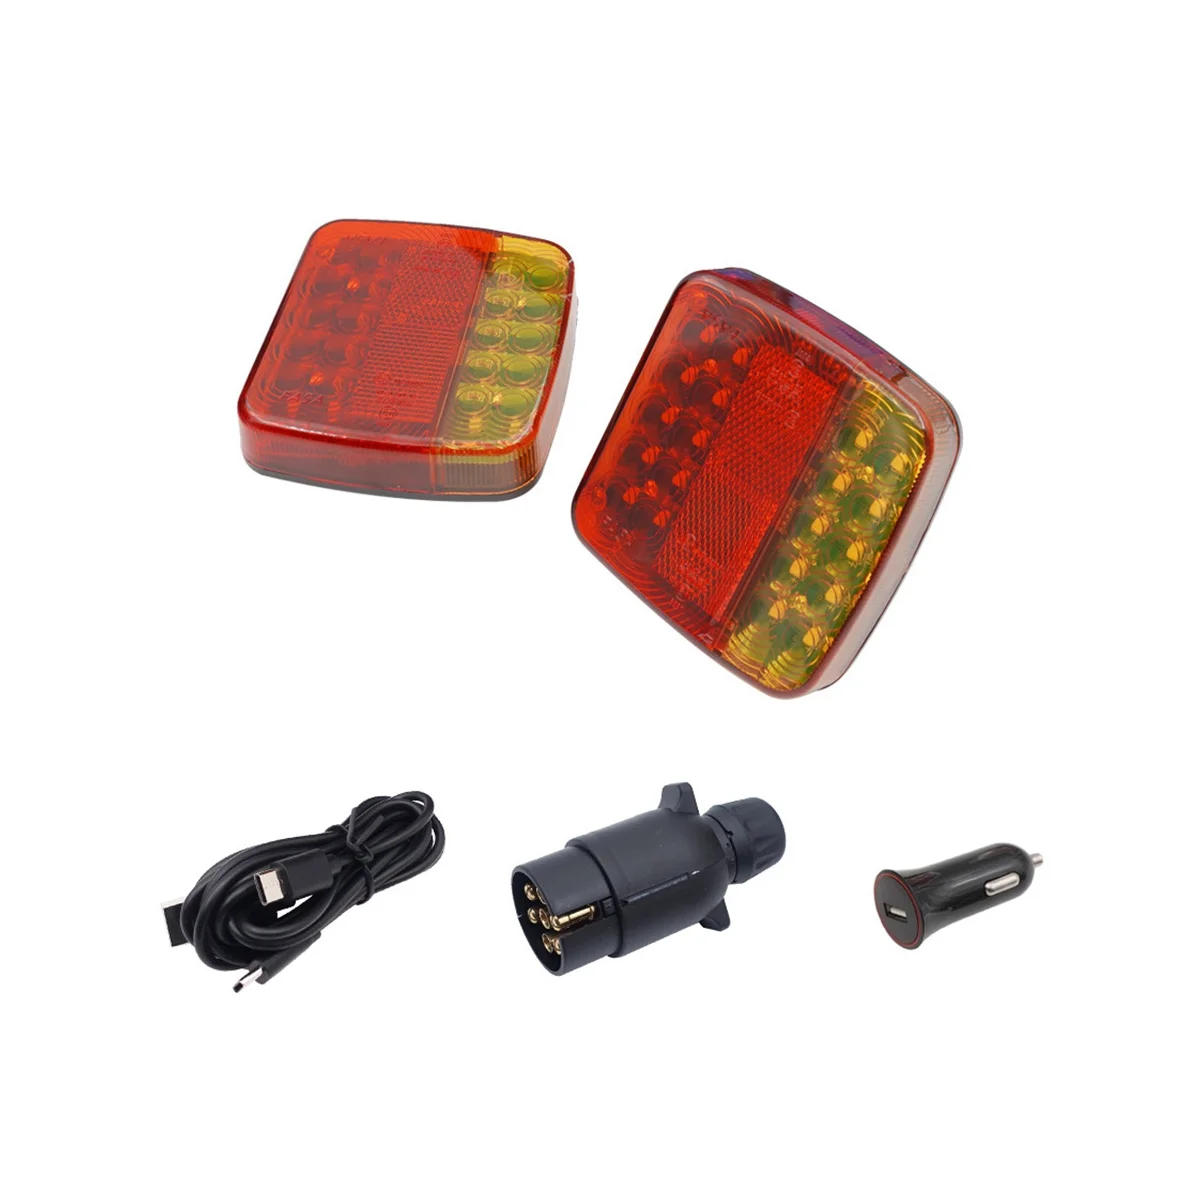 

Wireless Trailer Lights Kit for Towing Truck, Rechargeable LED Tow Light with netic for Boat Trailer RV